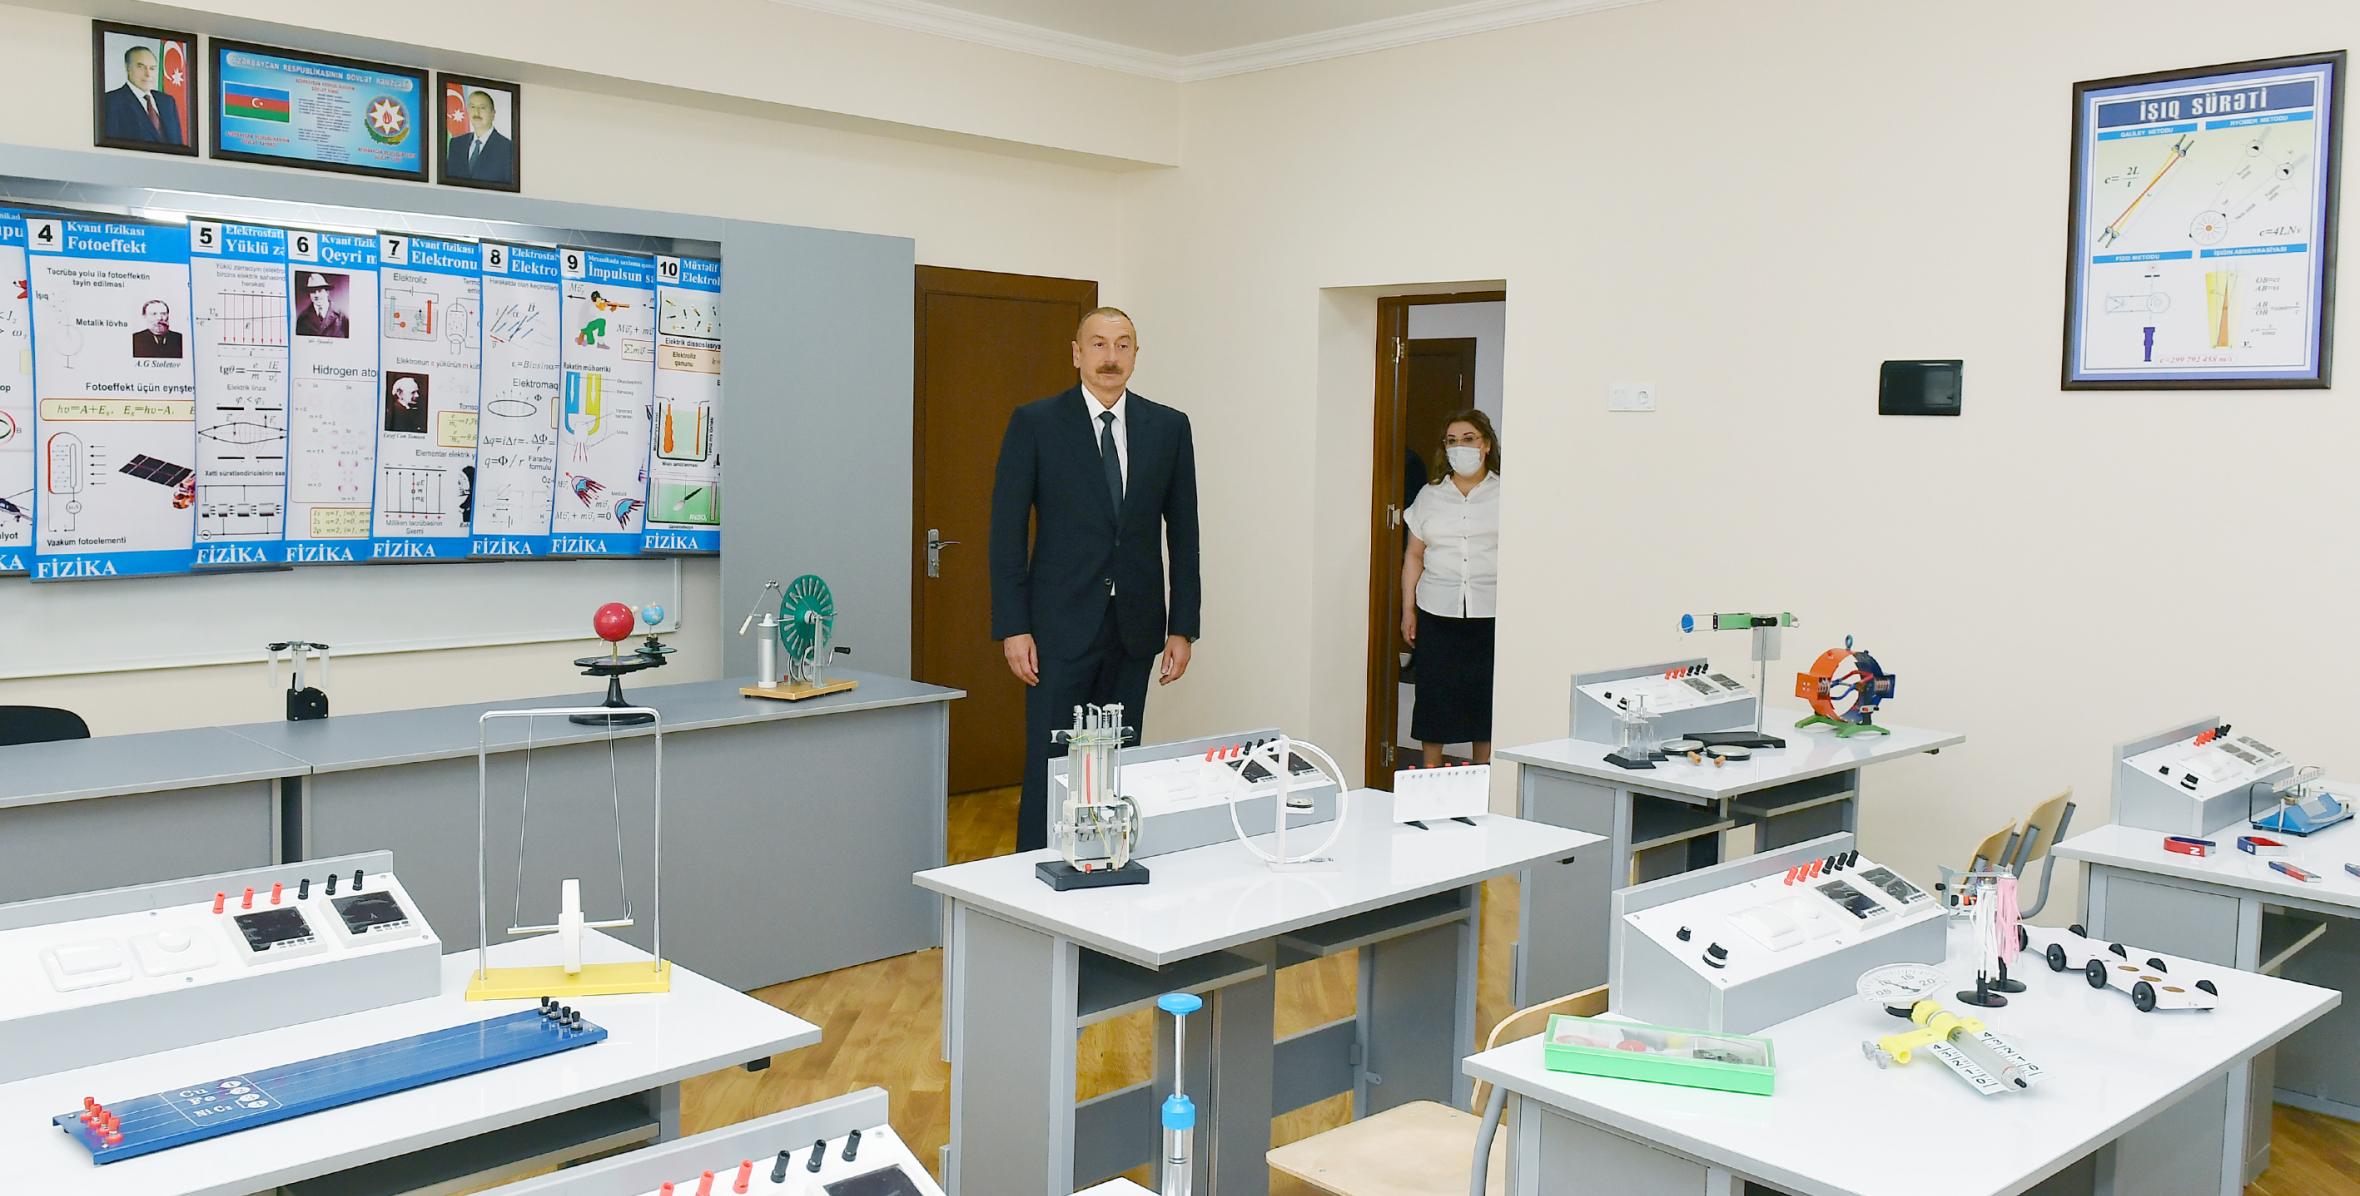 Ilham Aliyev viewed renovation work carried out at school No. 251, inaugurated the new facility of the school